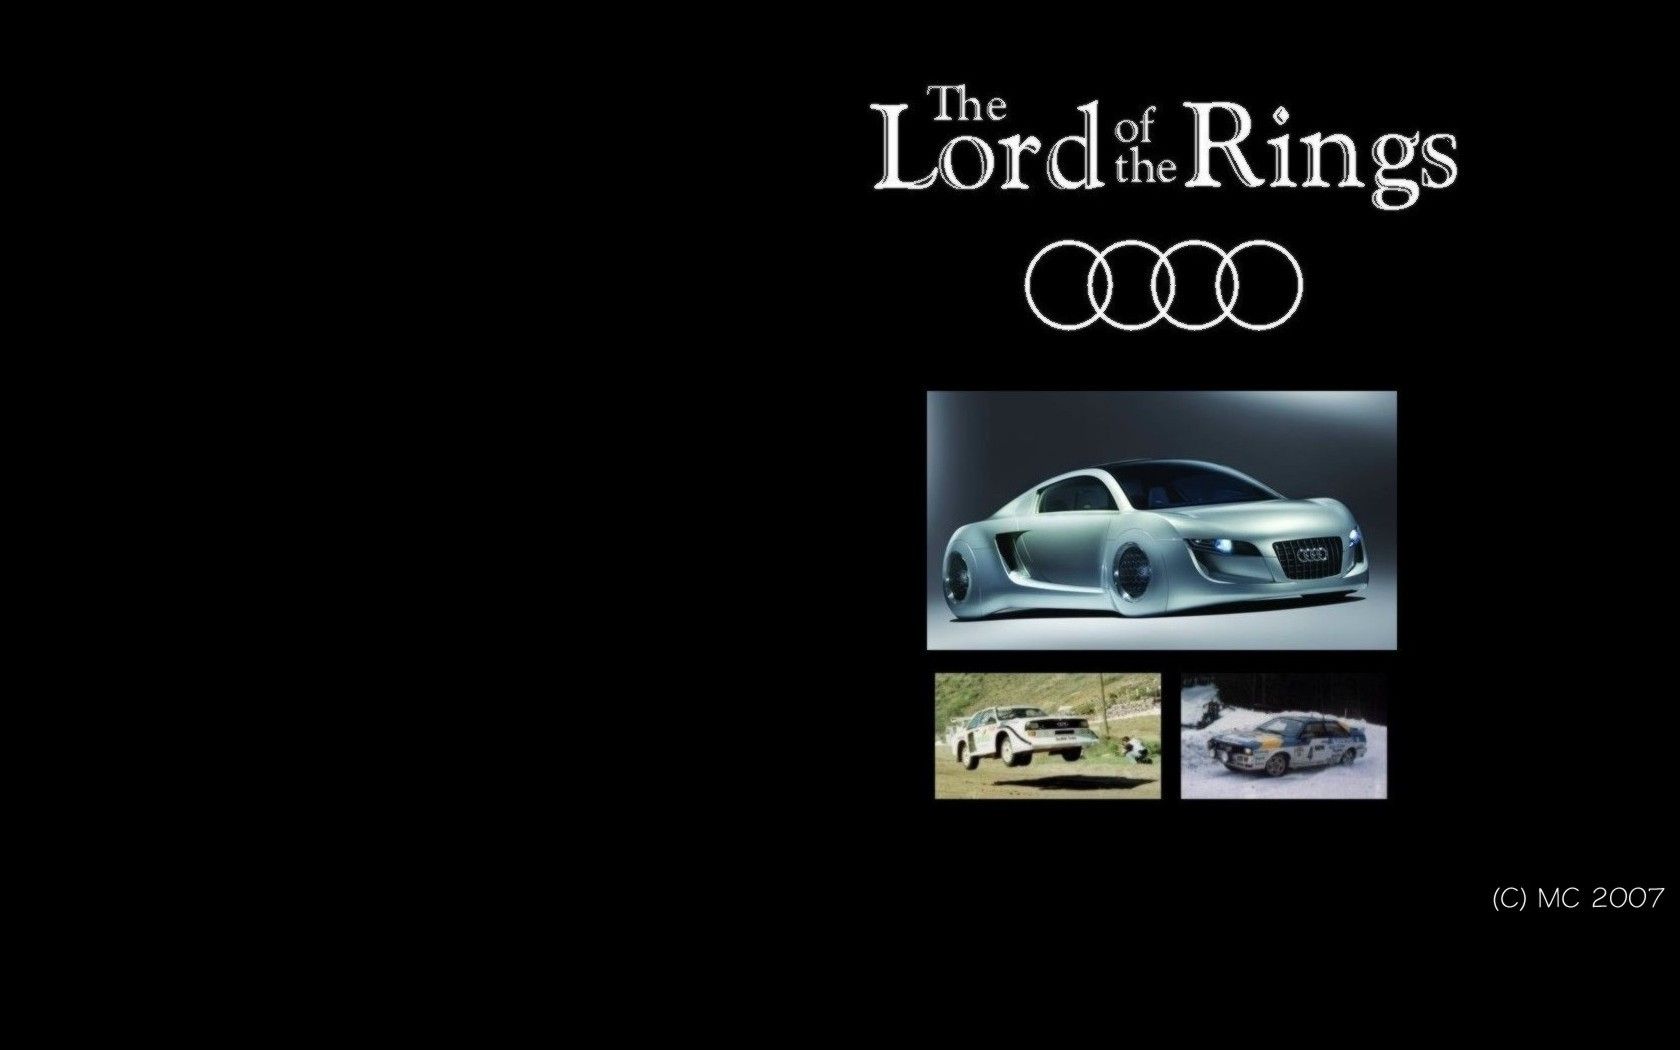 Computer widescreen wallpaper, Audi - Lord of the Rings